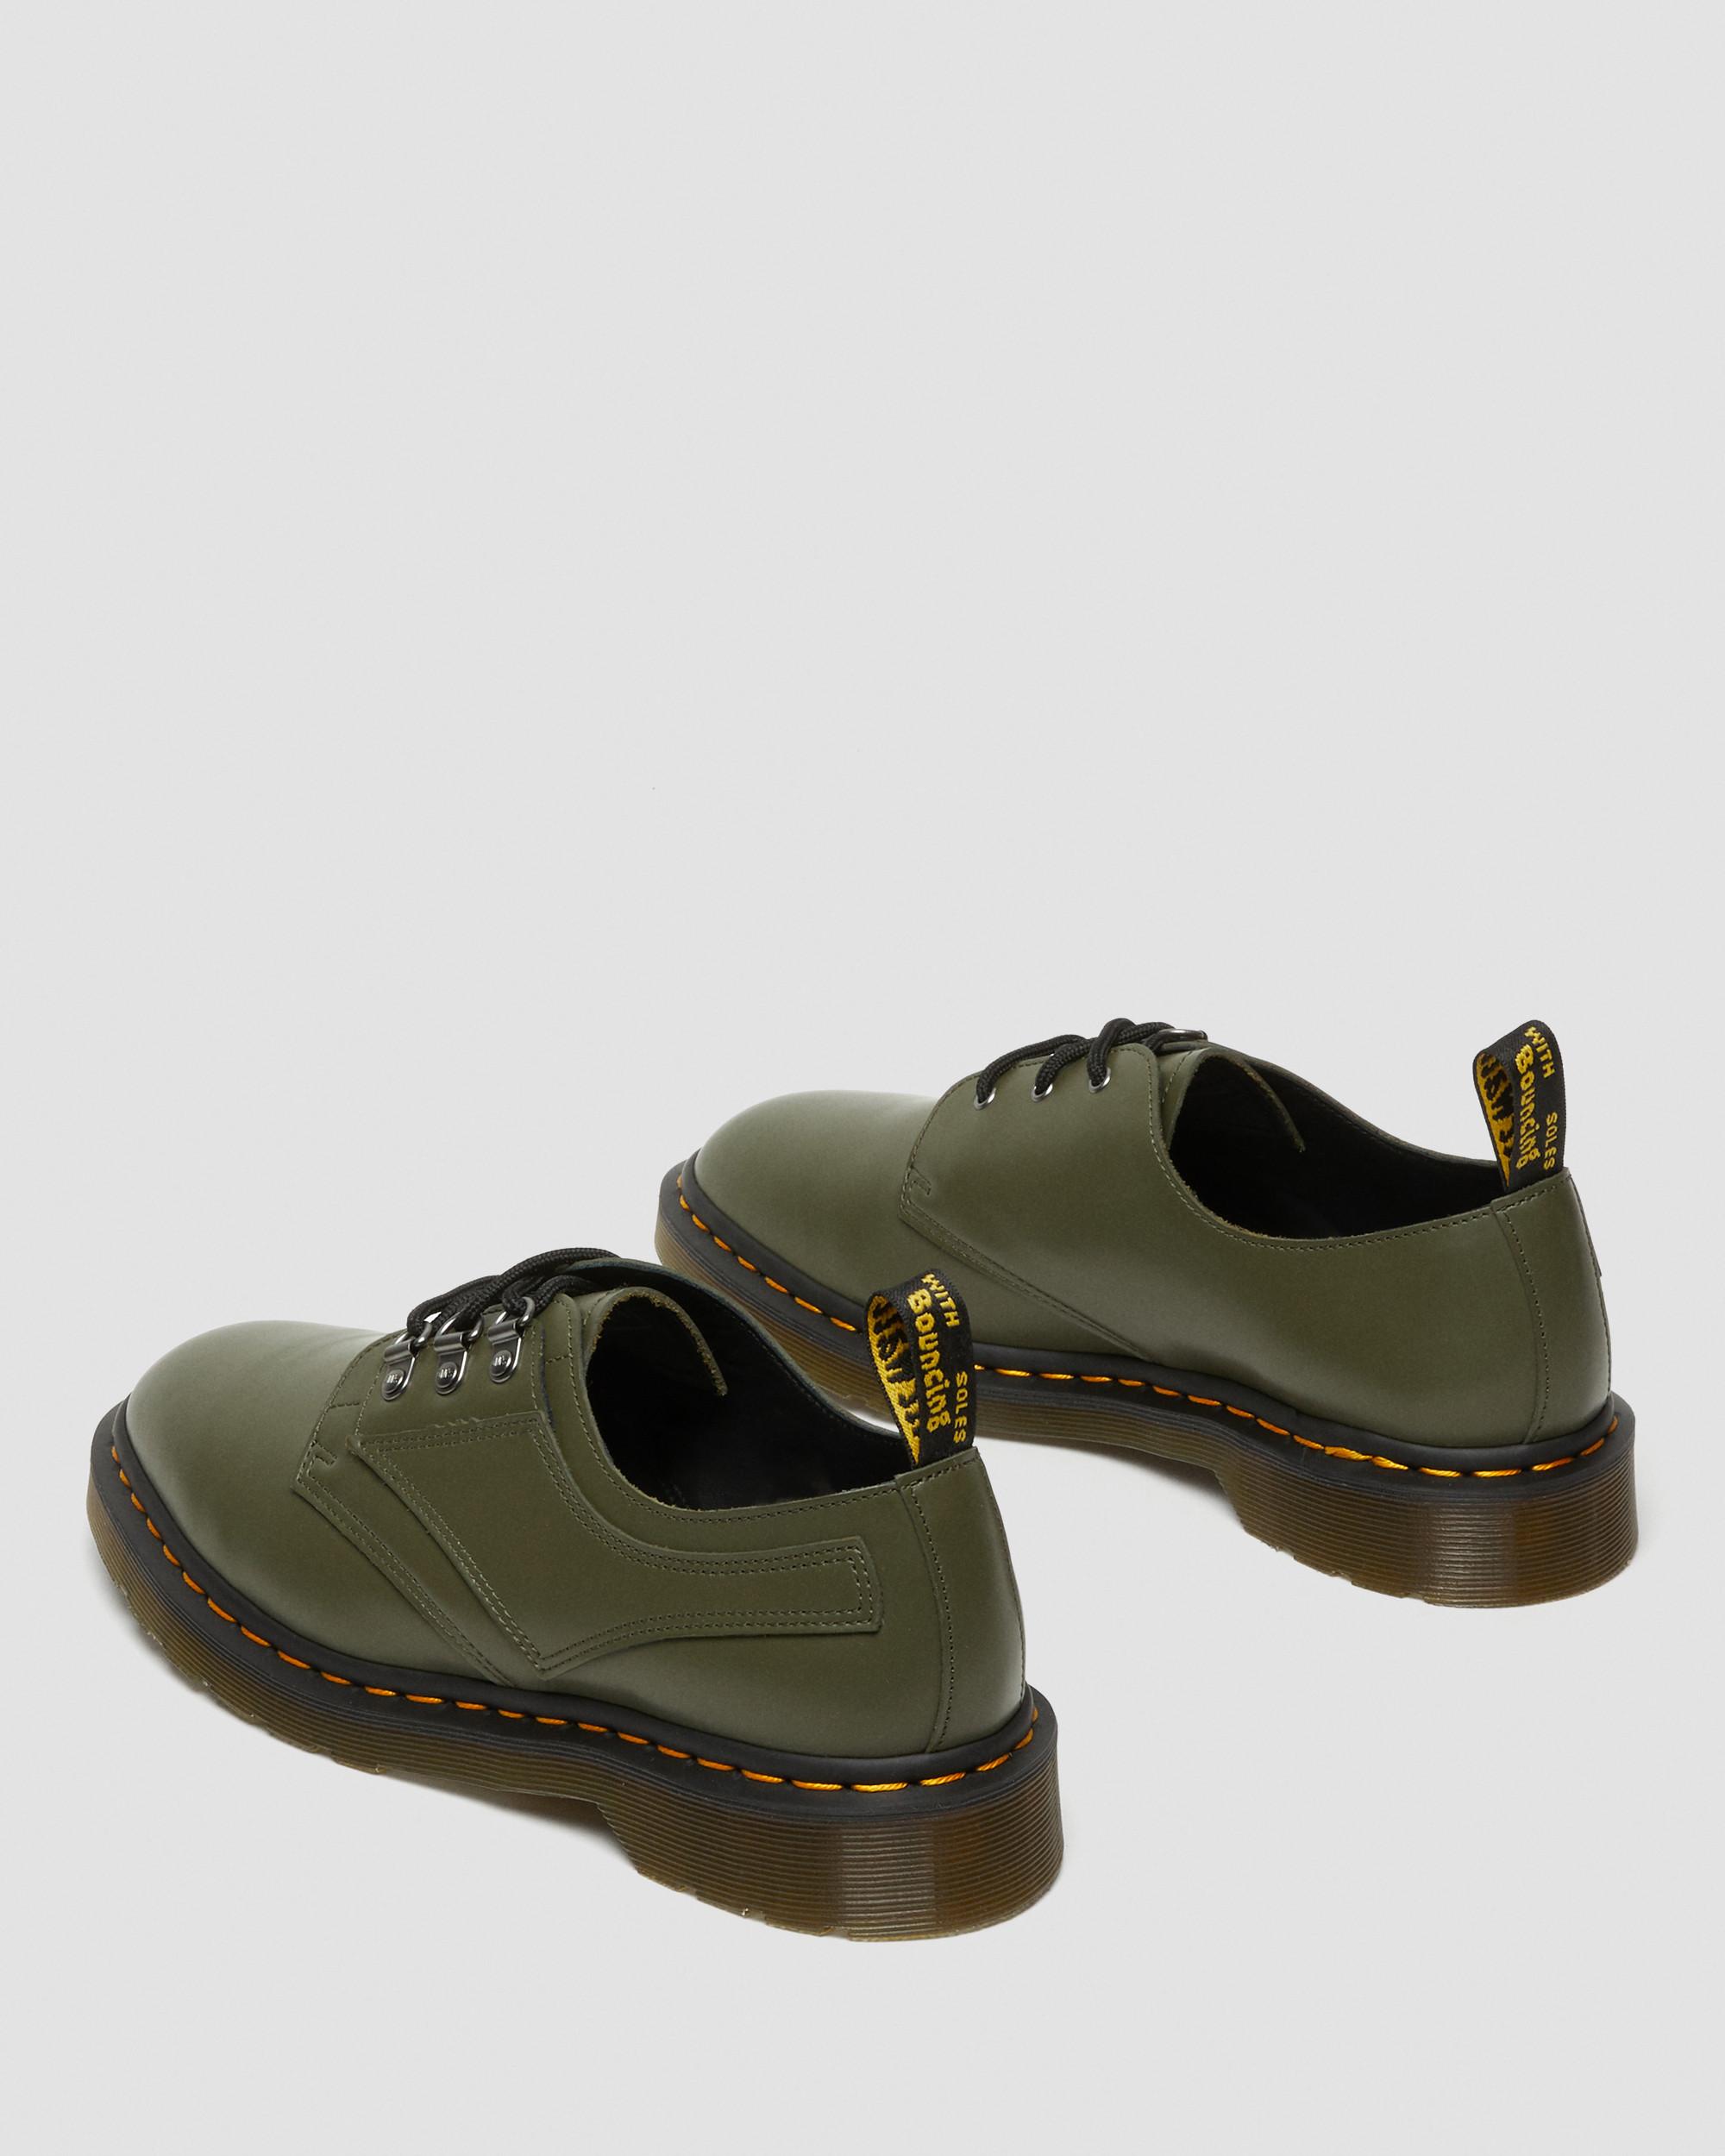 Verso Smooth Leather Oxford | Martens